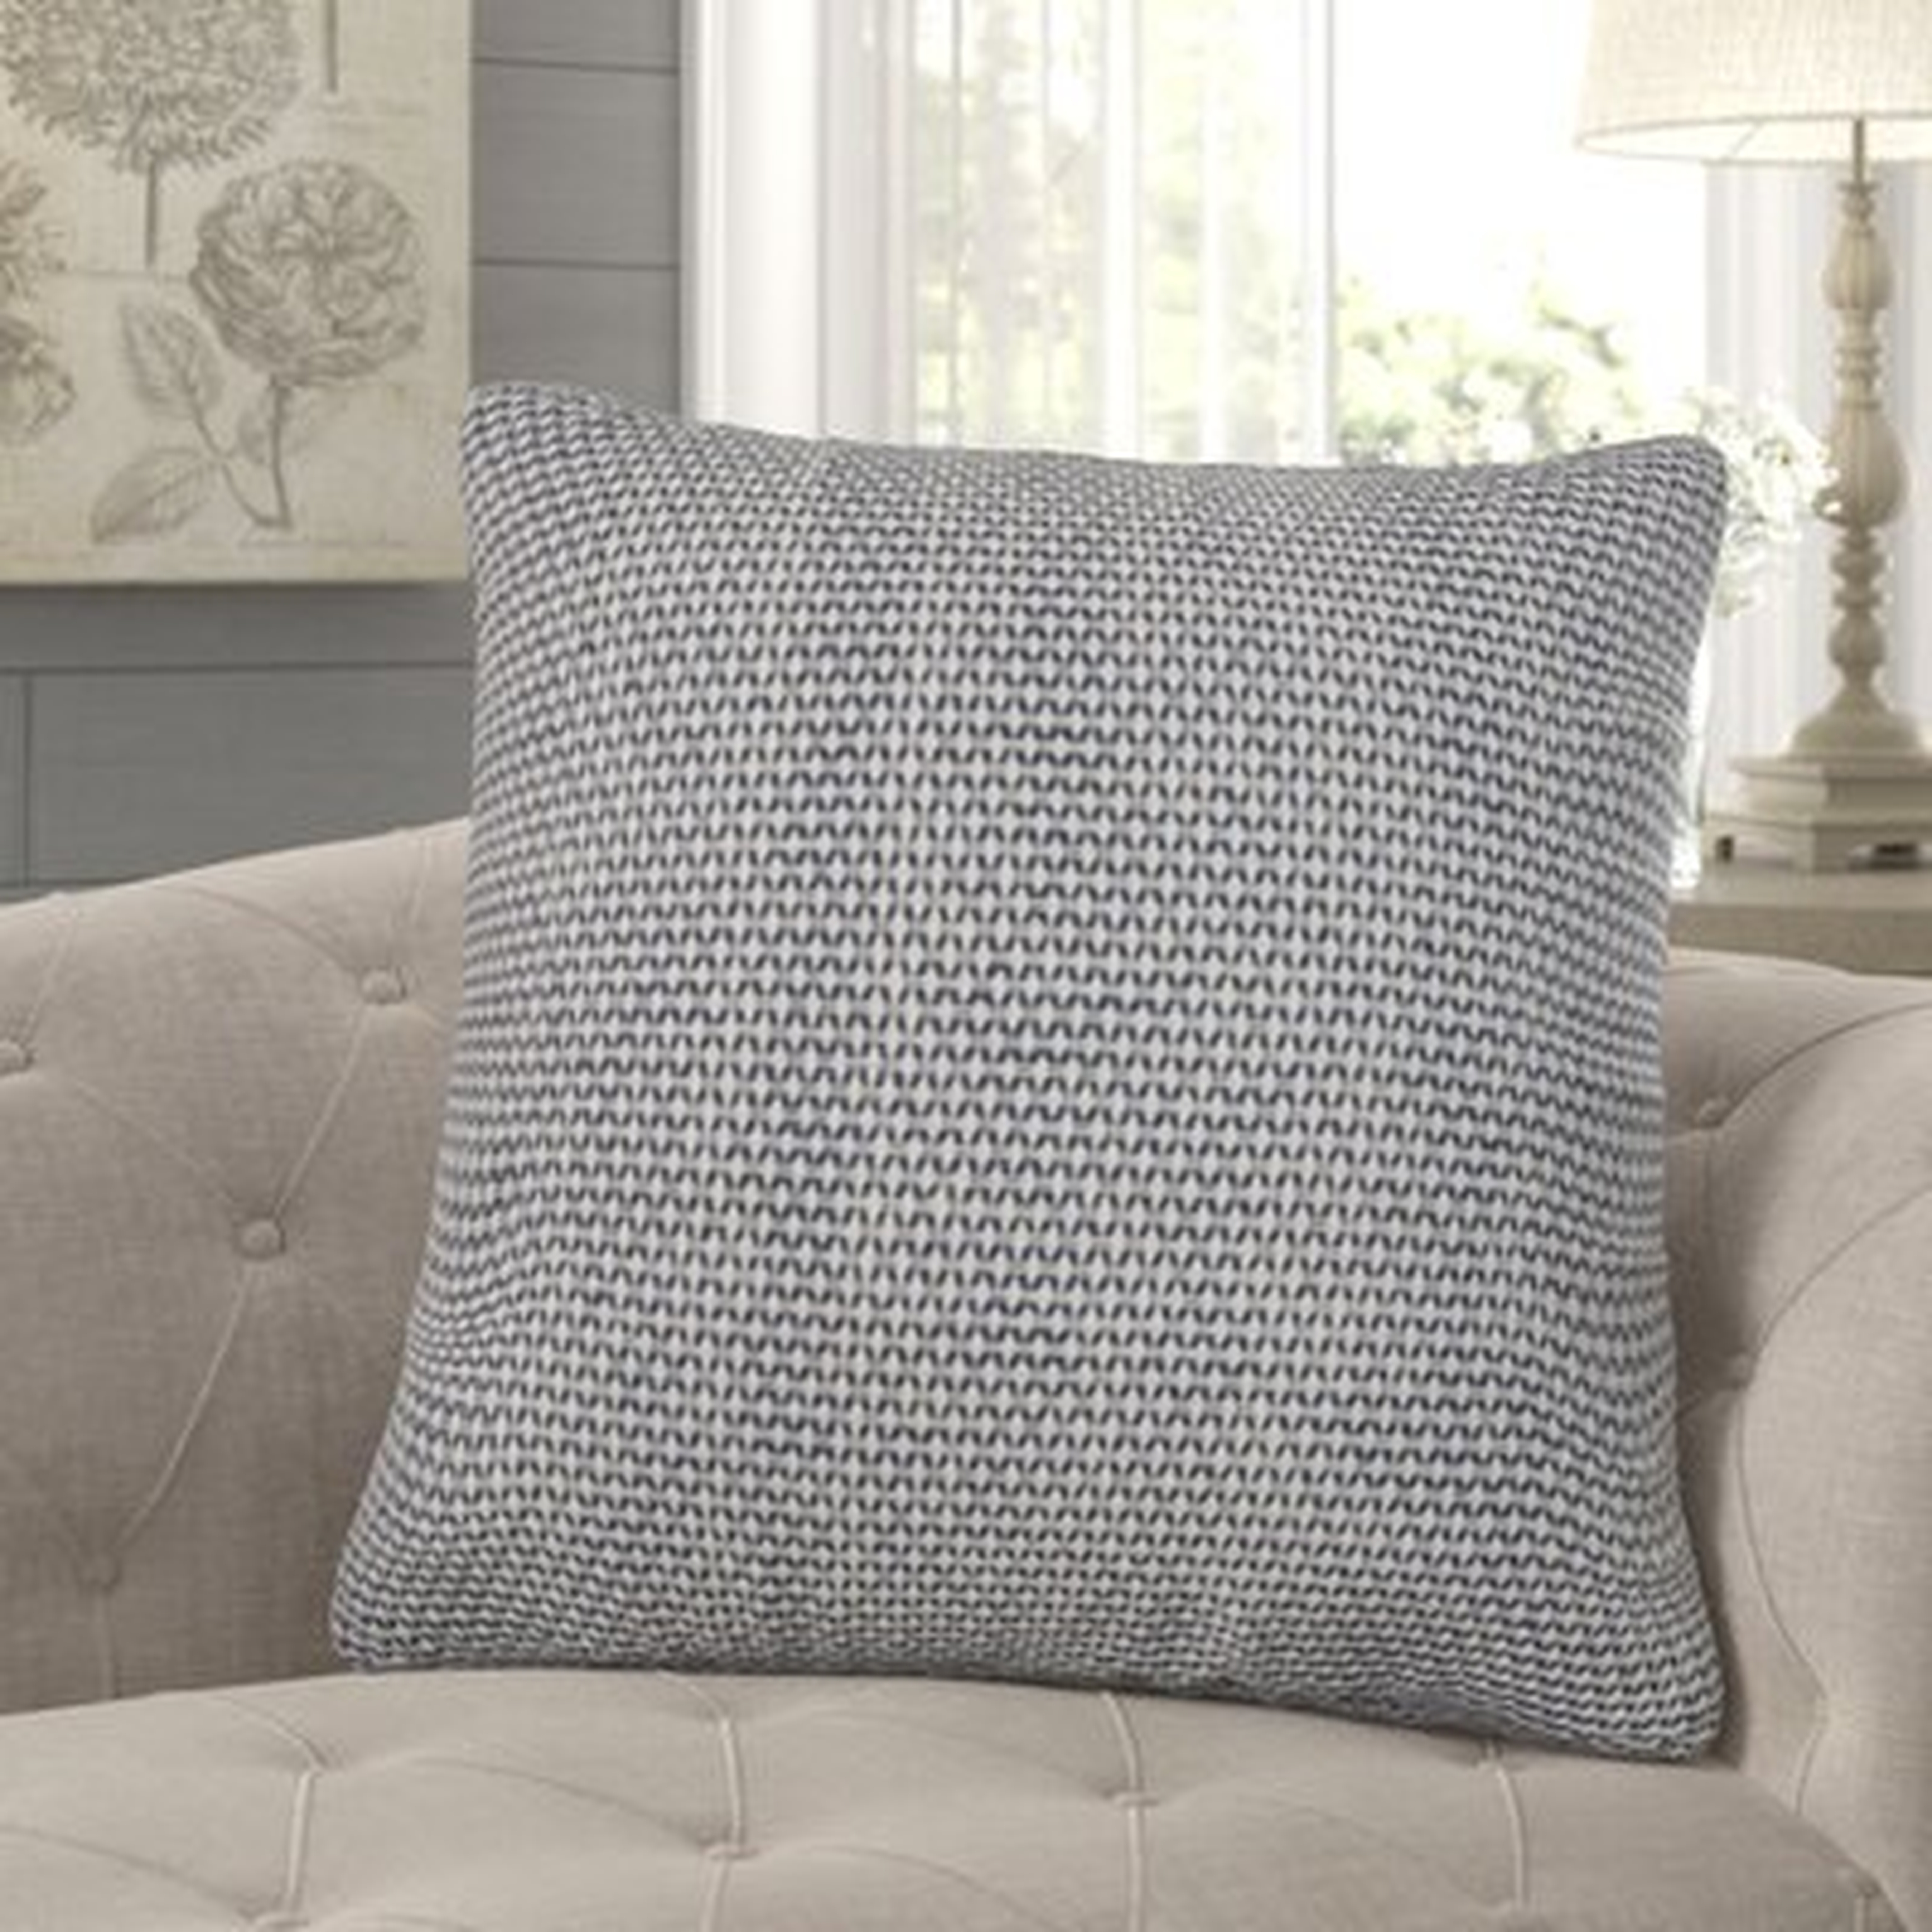 Tiana Square Cotton Pillow Cover and Insert - Wayfair